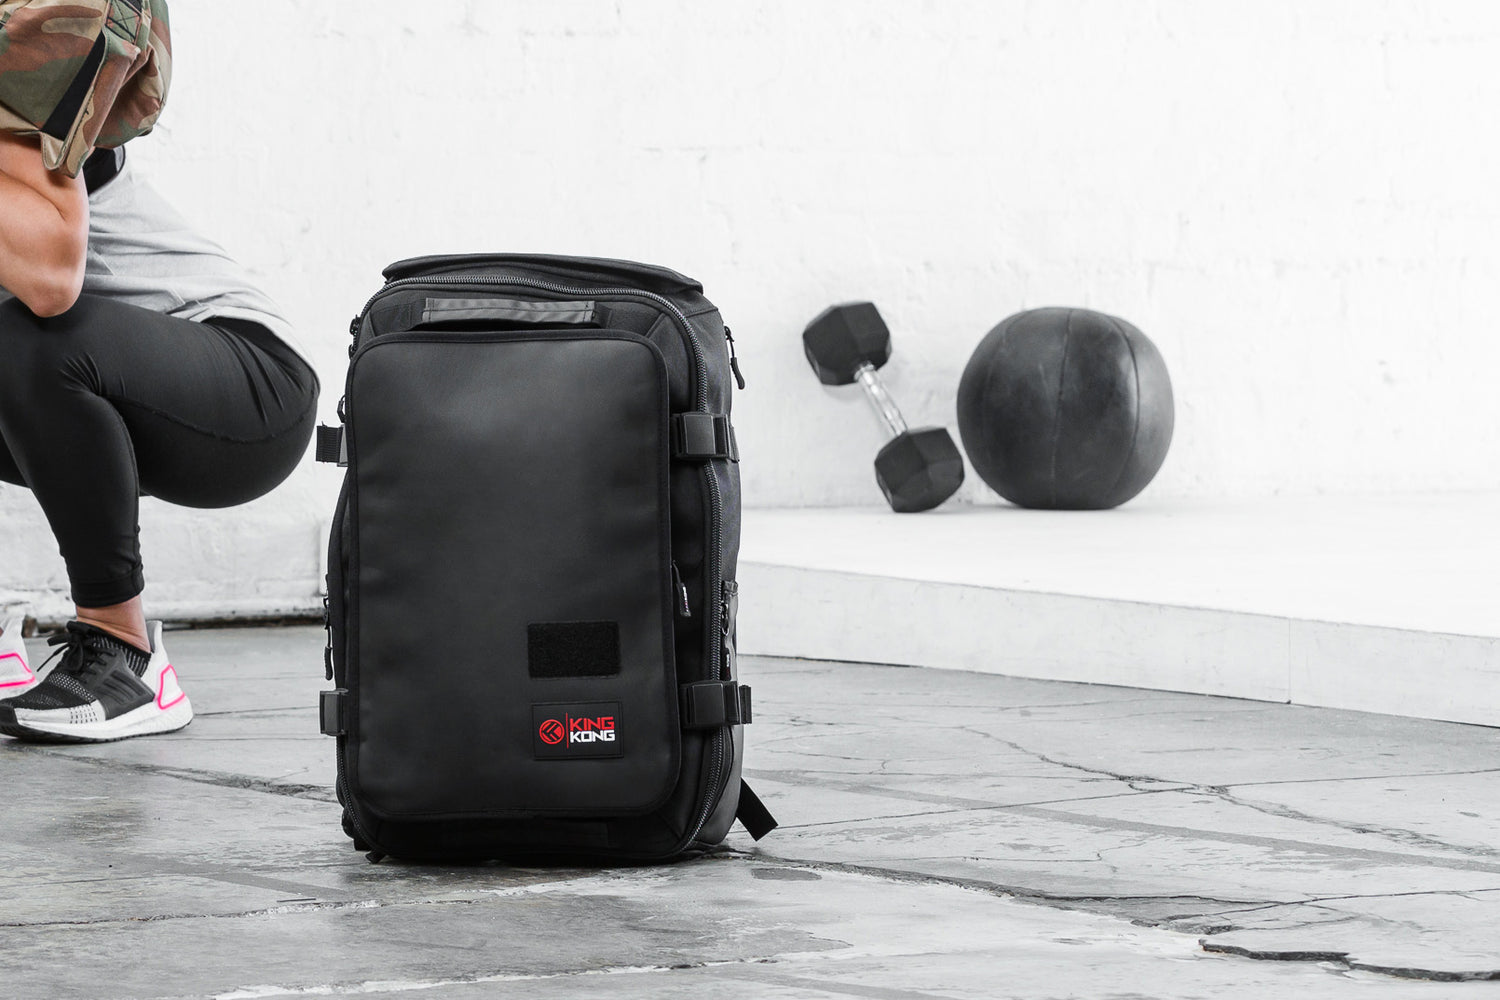 Voted "Best Backpack with Shoe Compartments" by Backpackies